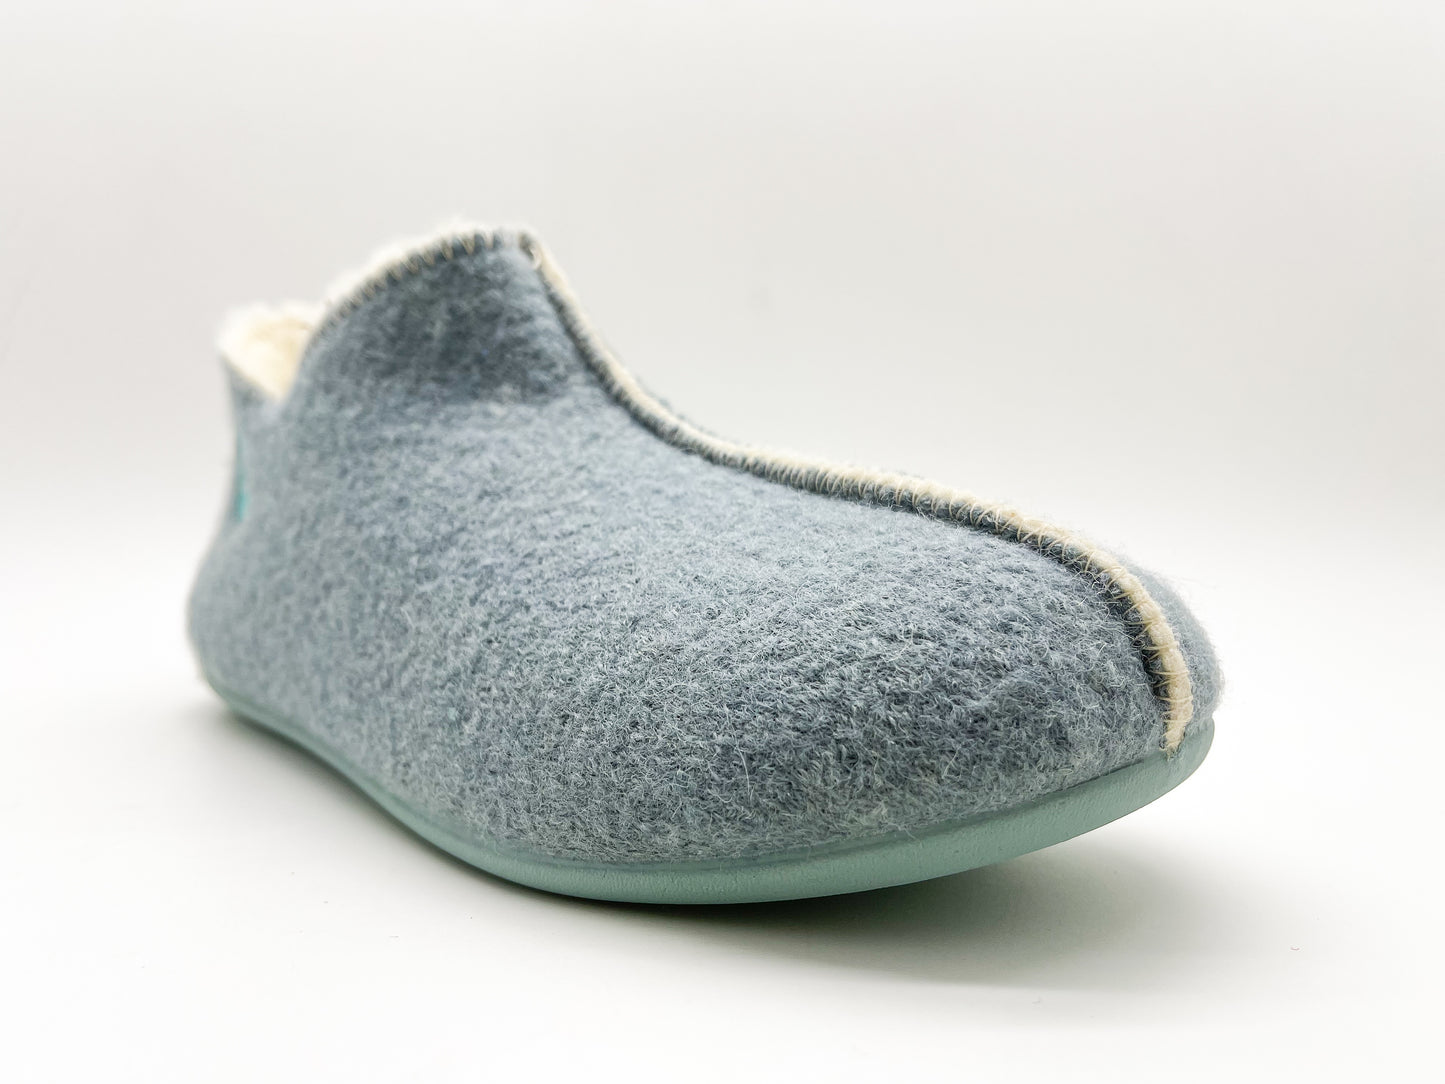 thies 1856 ® Slipper Boots mint with Eco Wool (W)